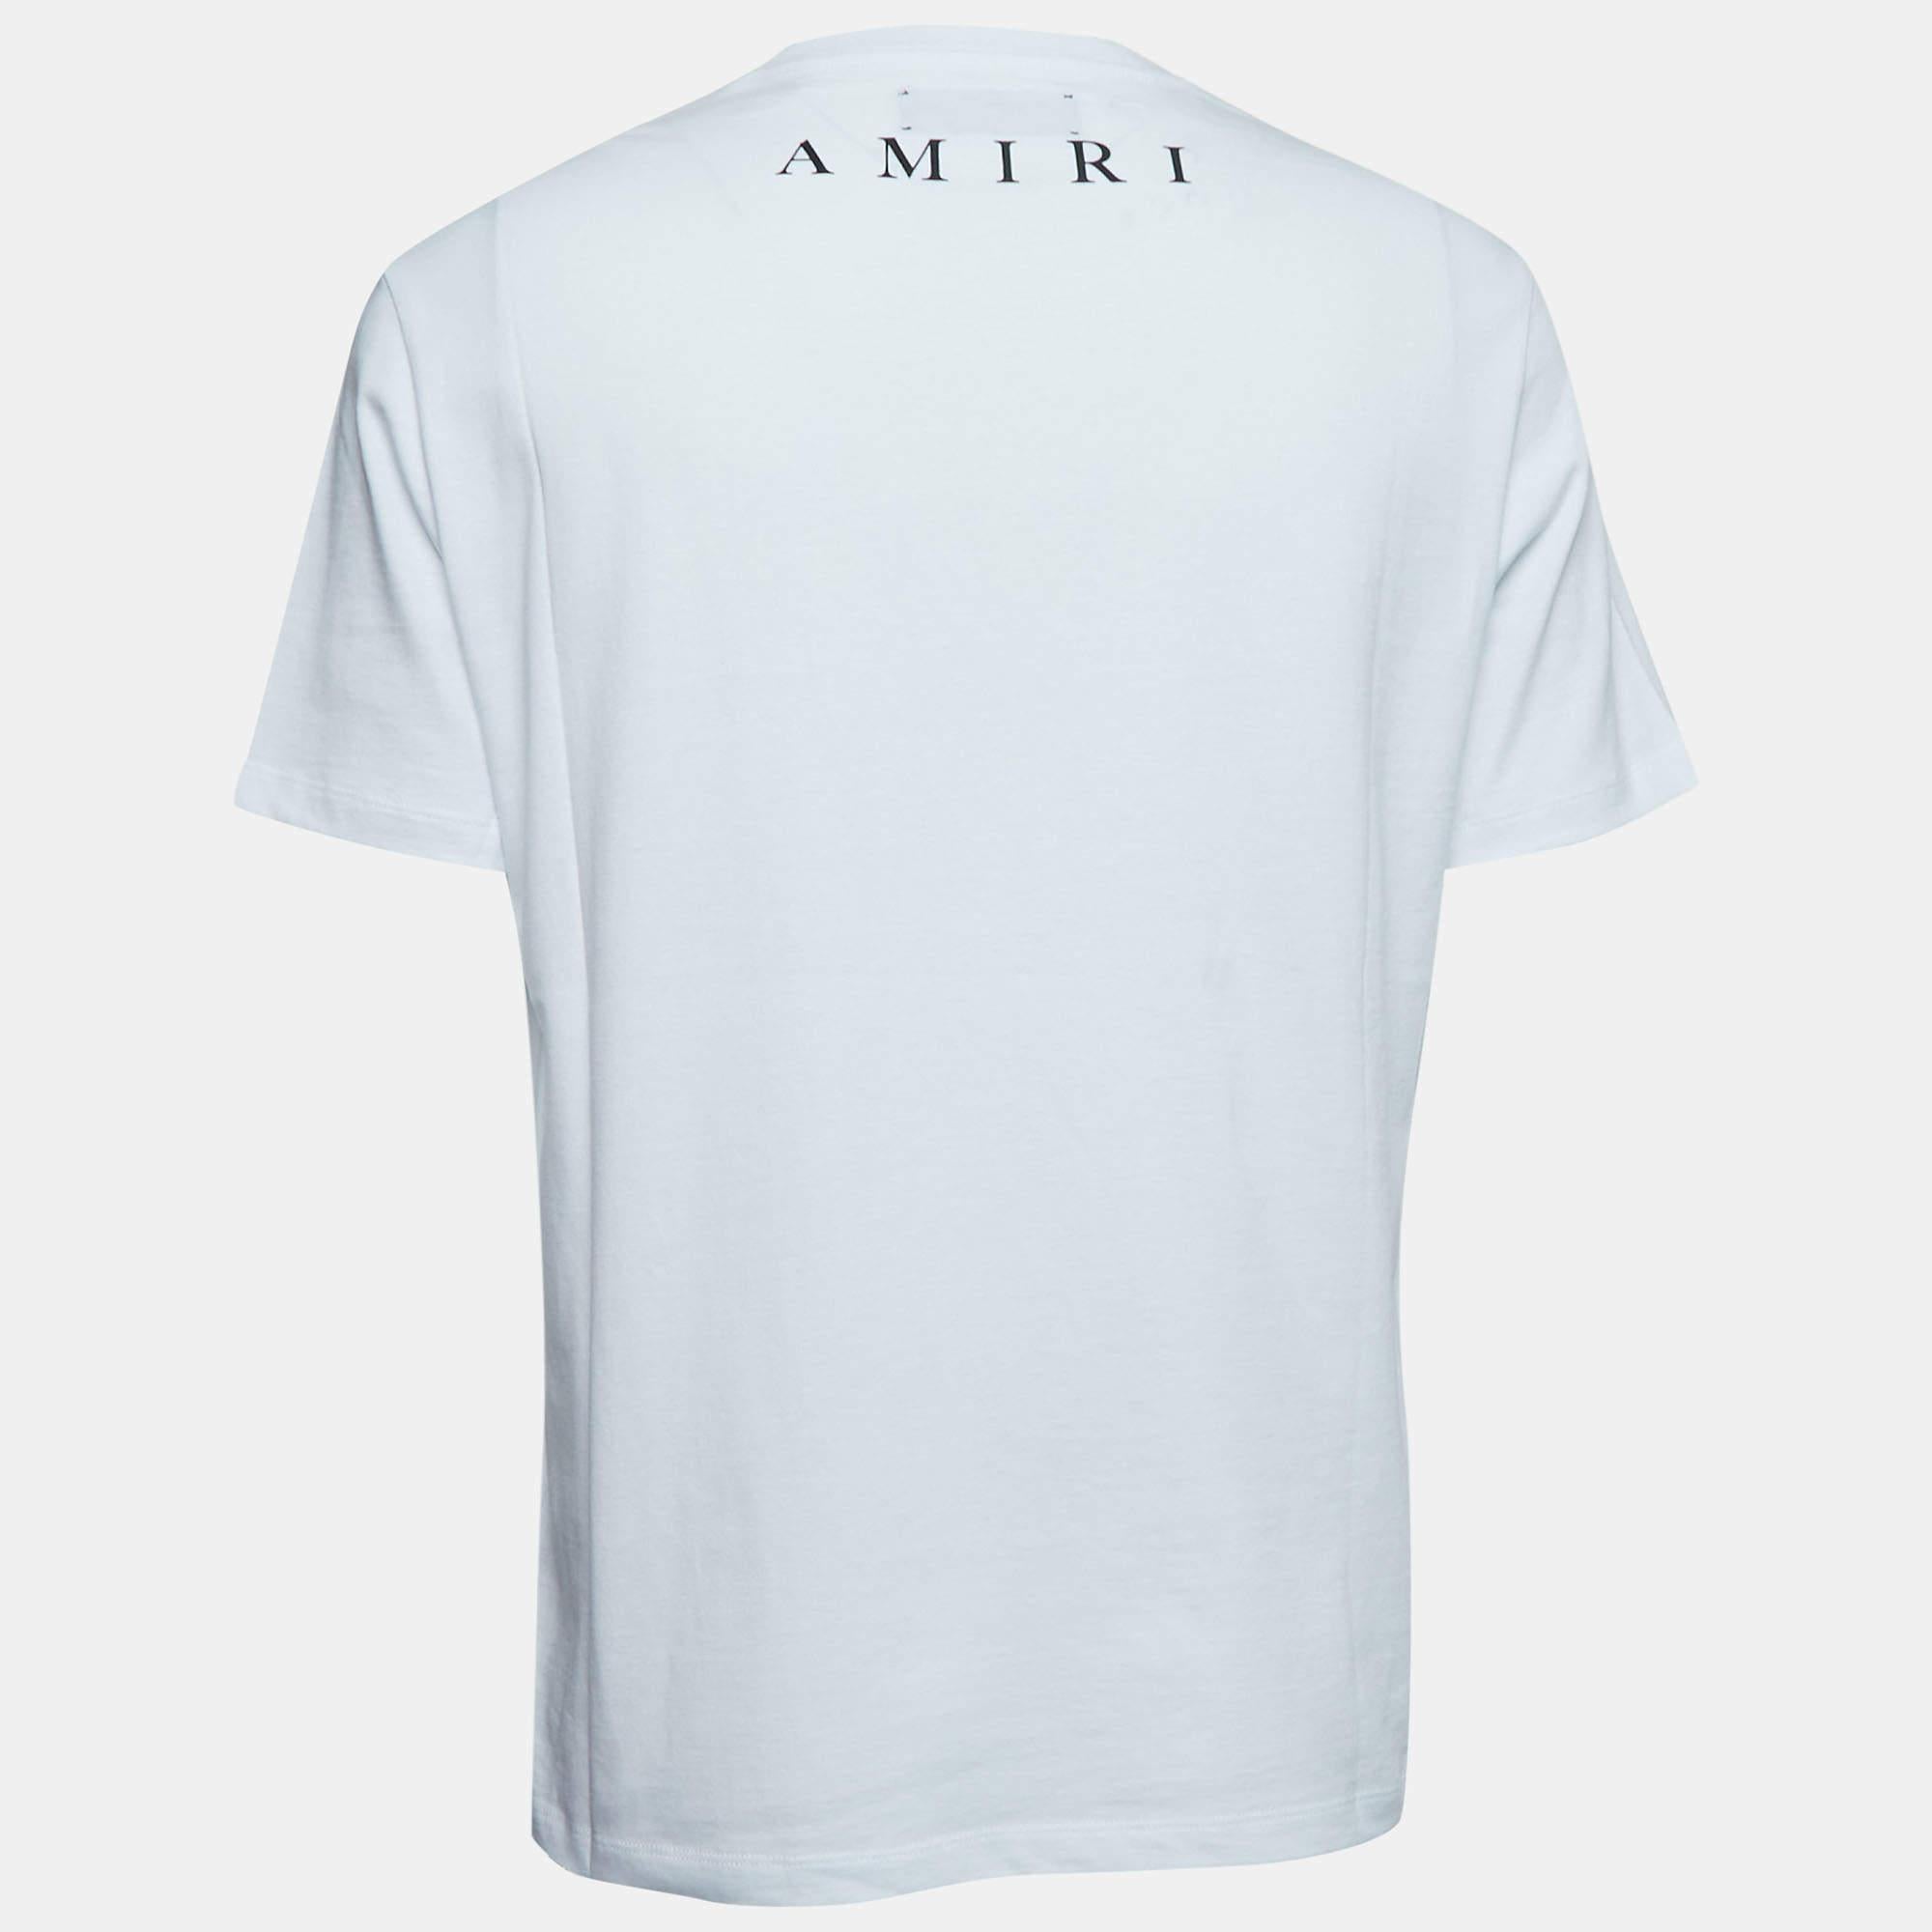 Whether you want to go out on casual outings with friends or just want to lounge around, this t-shirt is a versatile piece and can be styled in many ways. It has been made using fine fabric.

